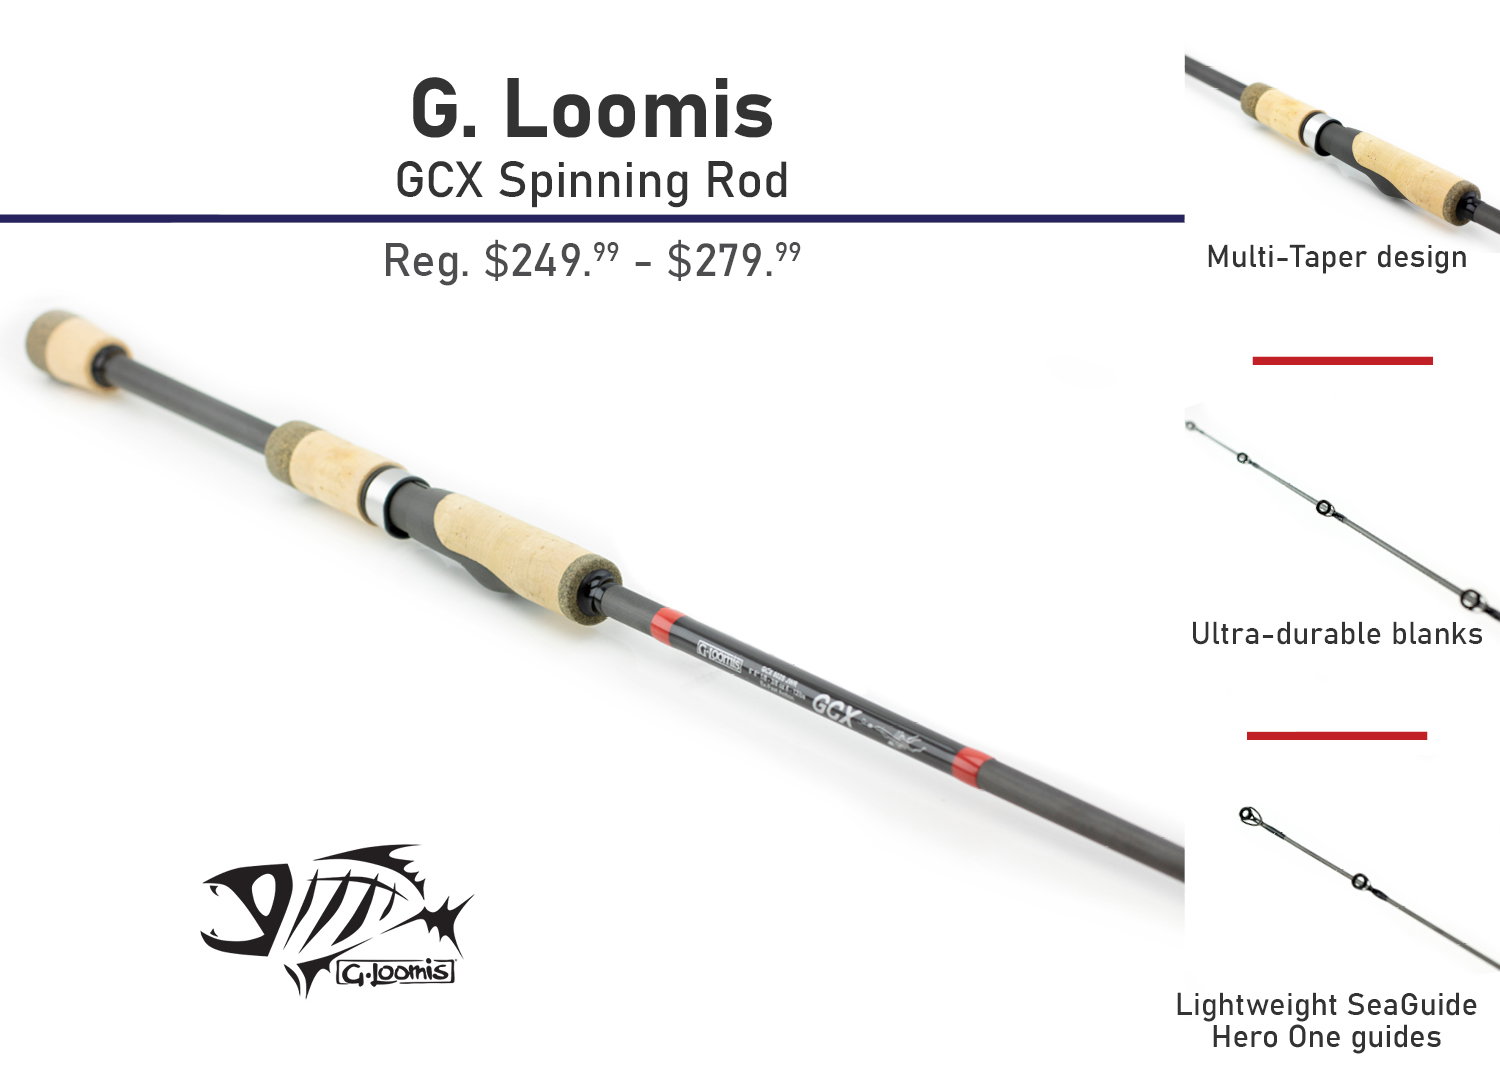 FishUSA: Limited-Time FishLab Offer Inside + New G. Loomis GCX Rods